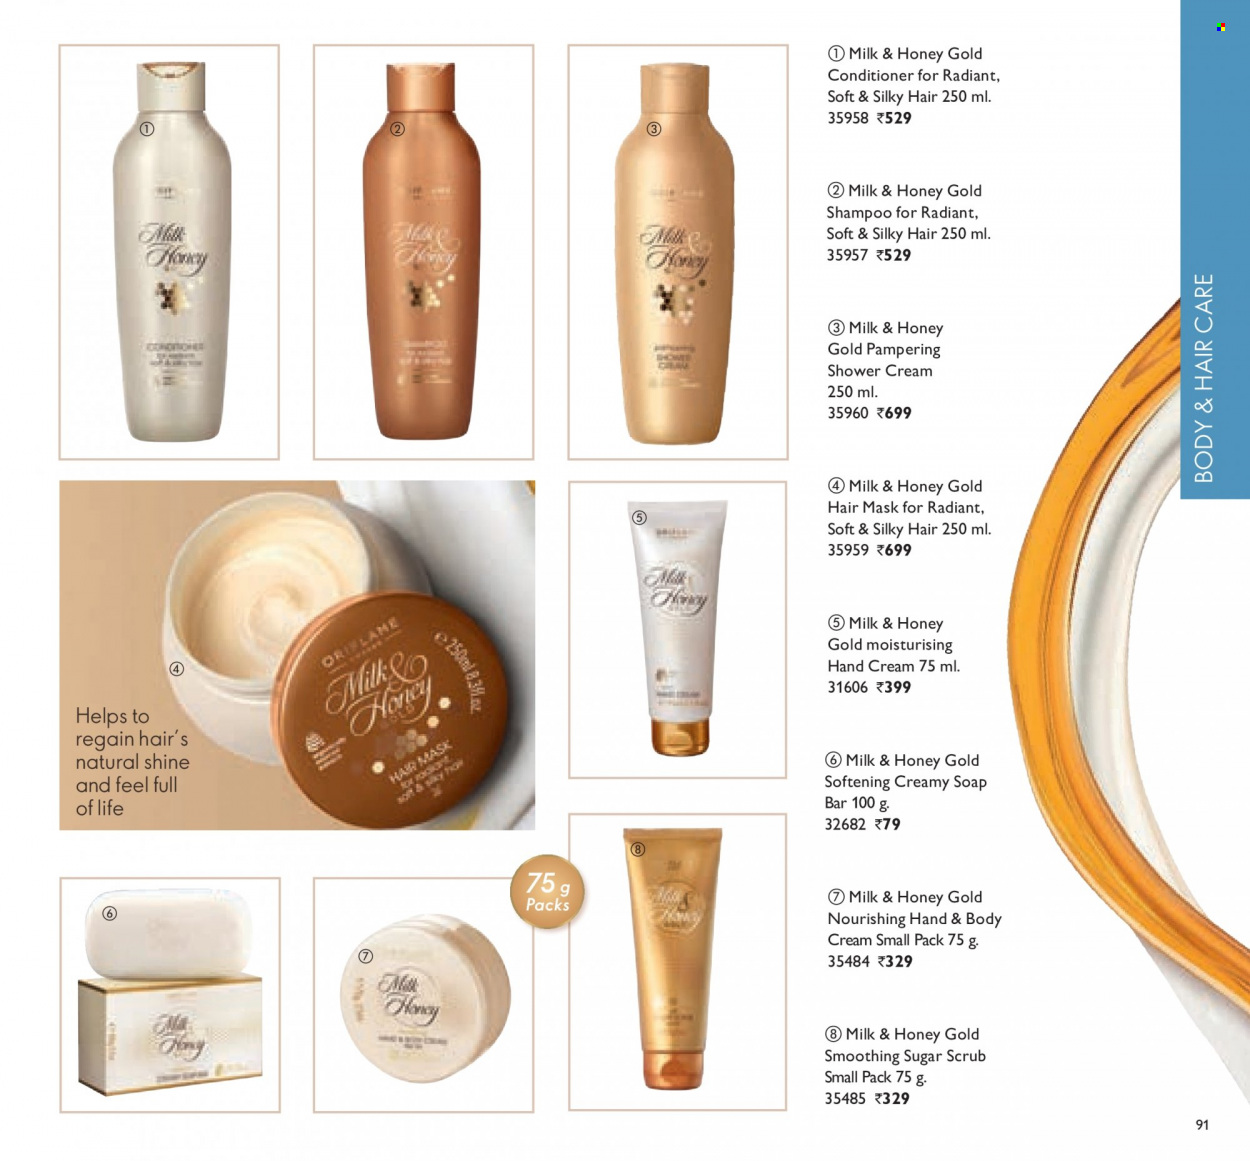 Oriflame offer . Page 91.